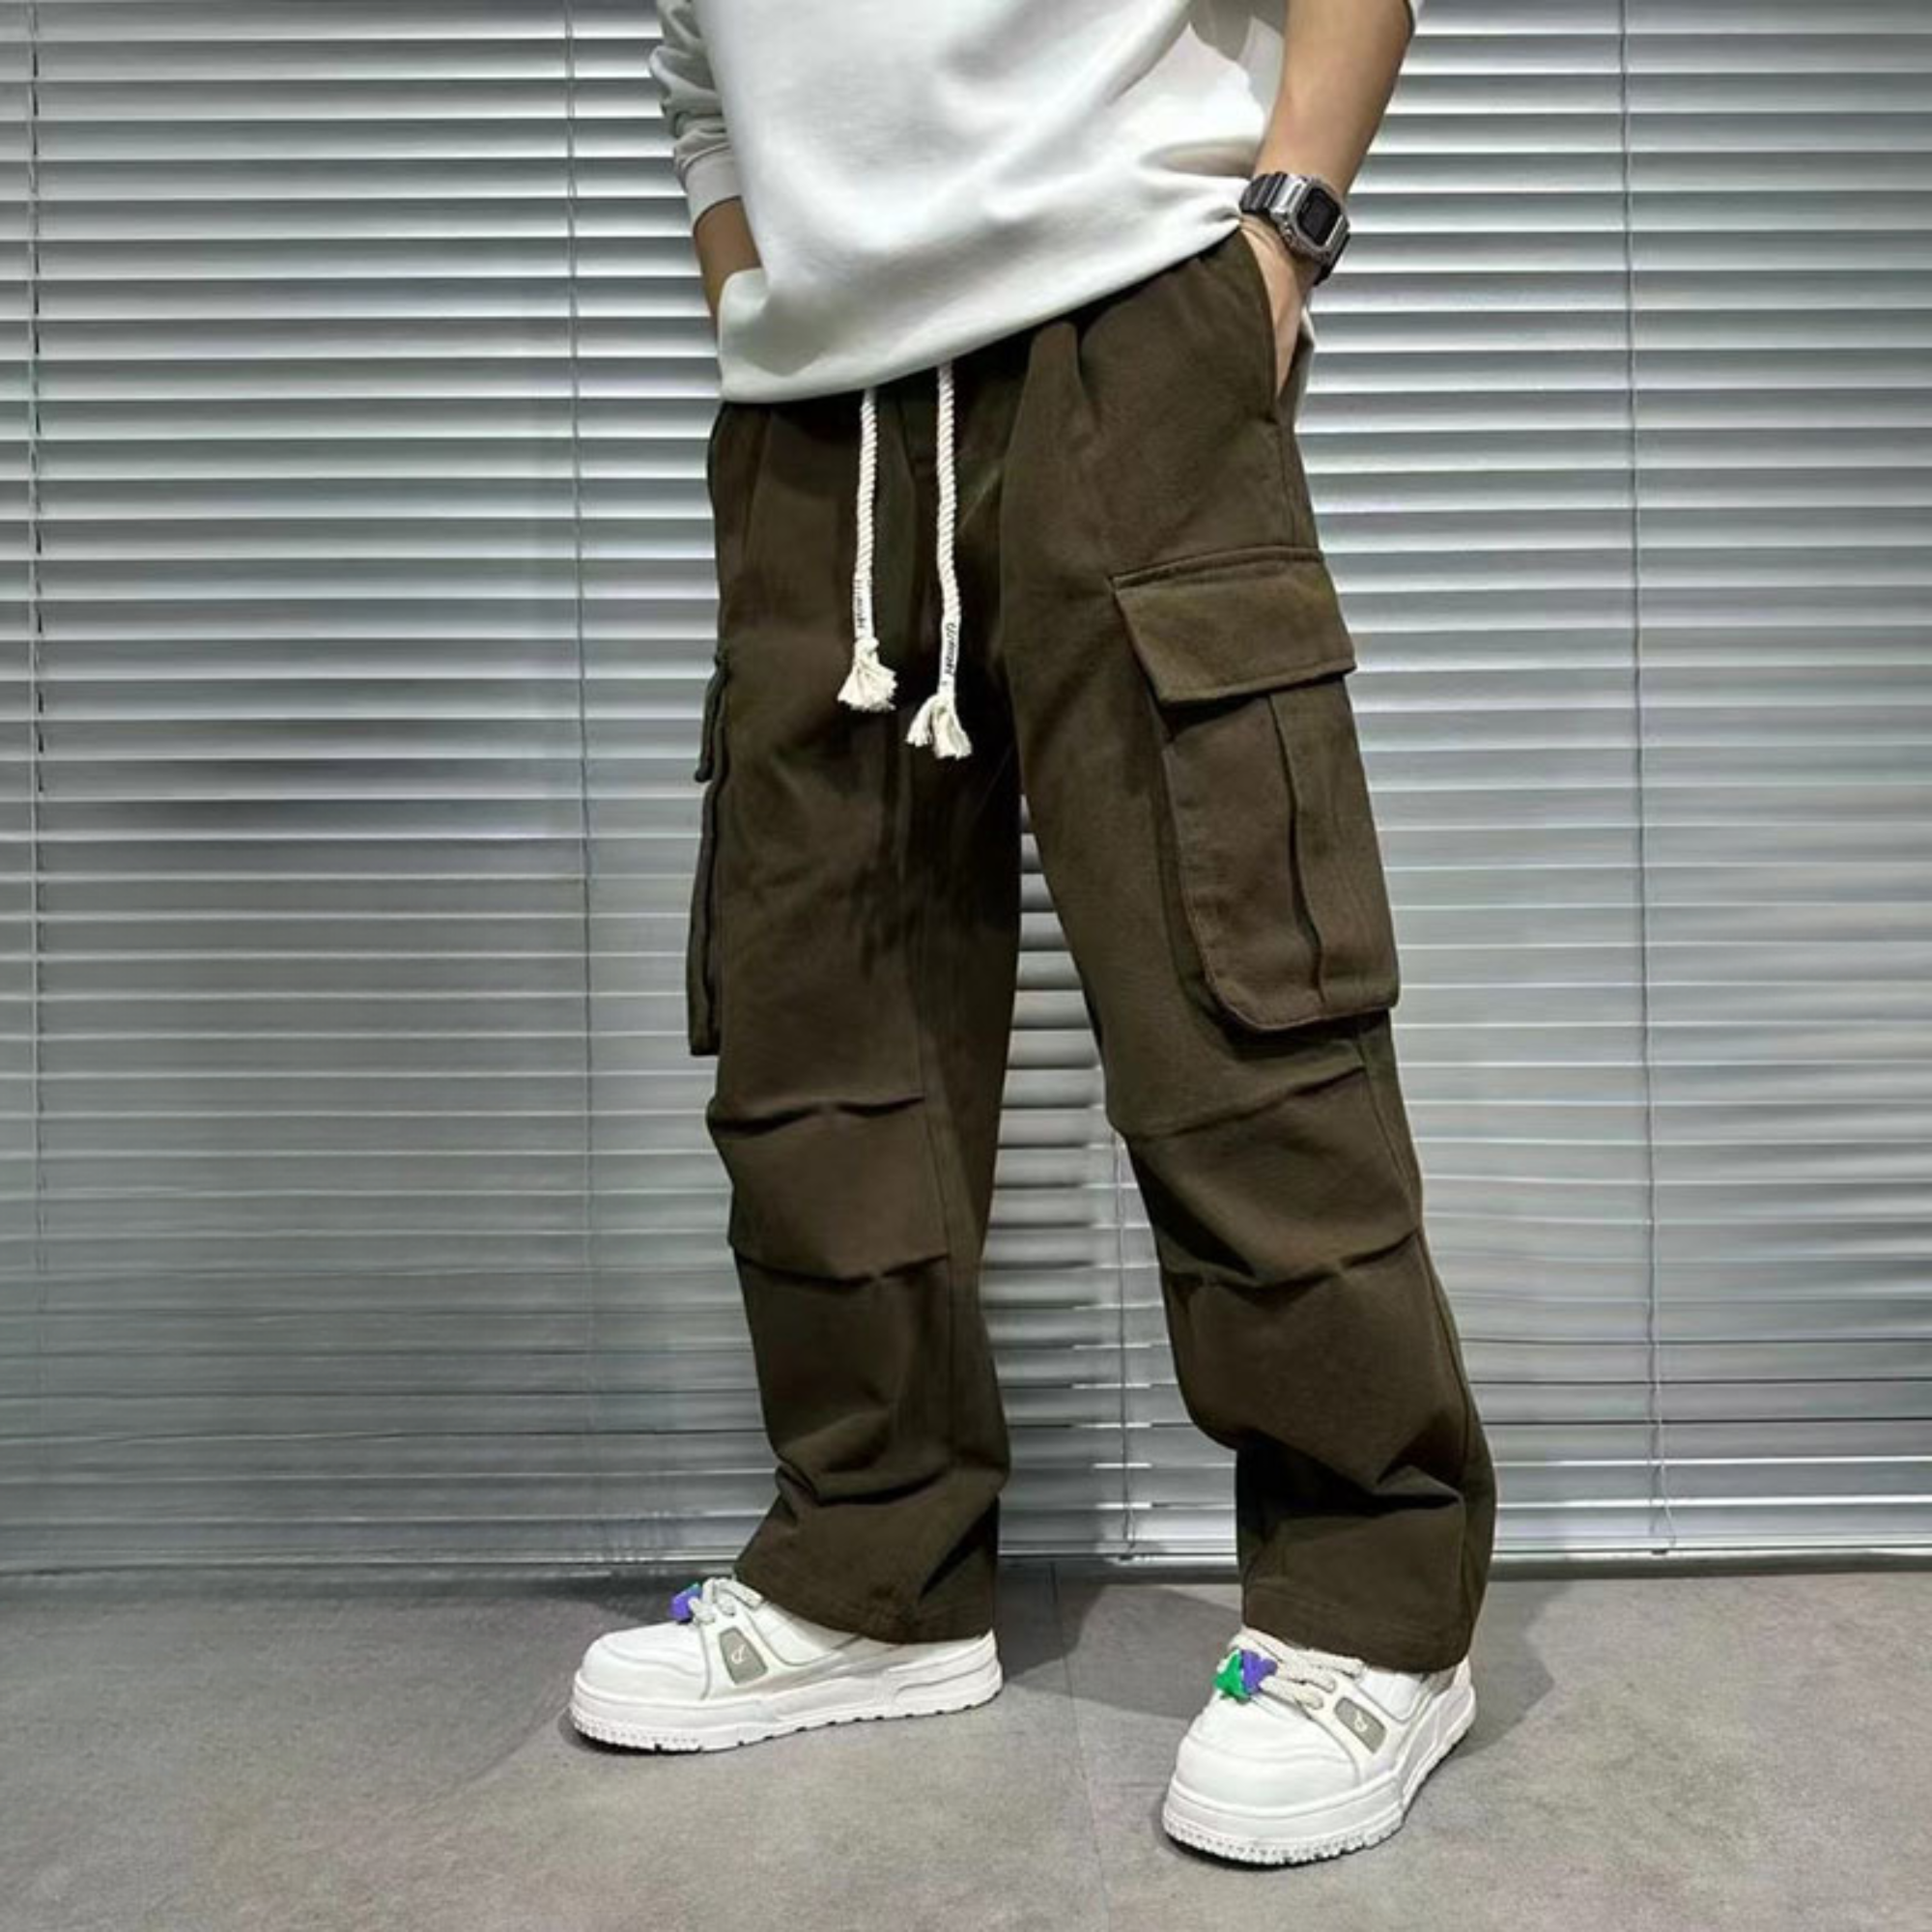 Military Style Camouflage Tactical Pants Streetwear Hip Hop Harem Cargo  Trousers | eBay